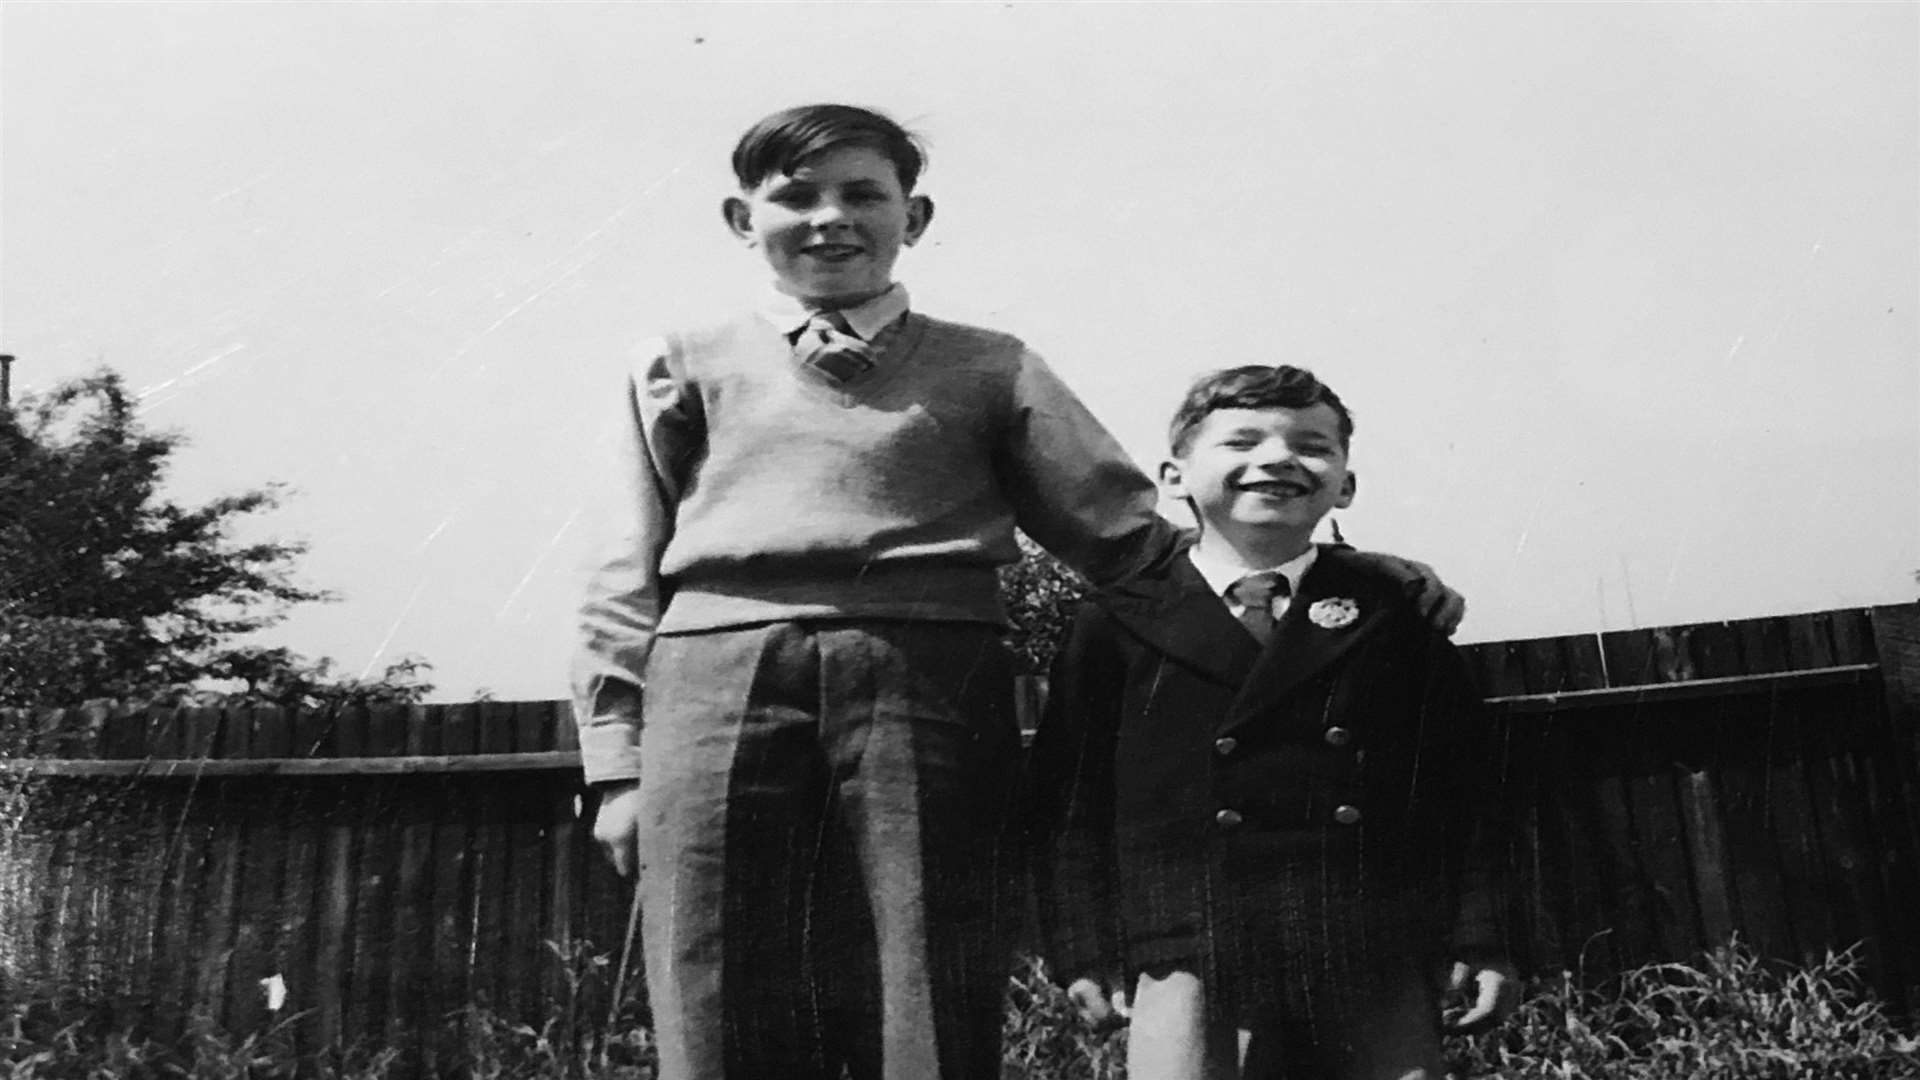 Tony Larkin (left) with his foster brother Alan O'Neill